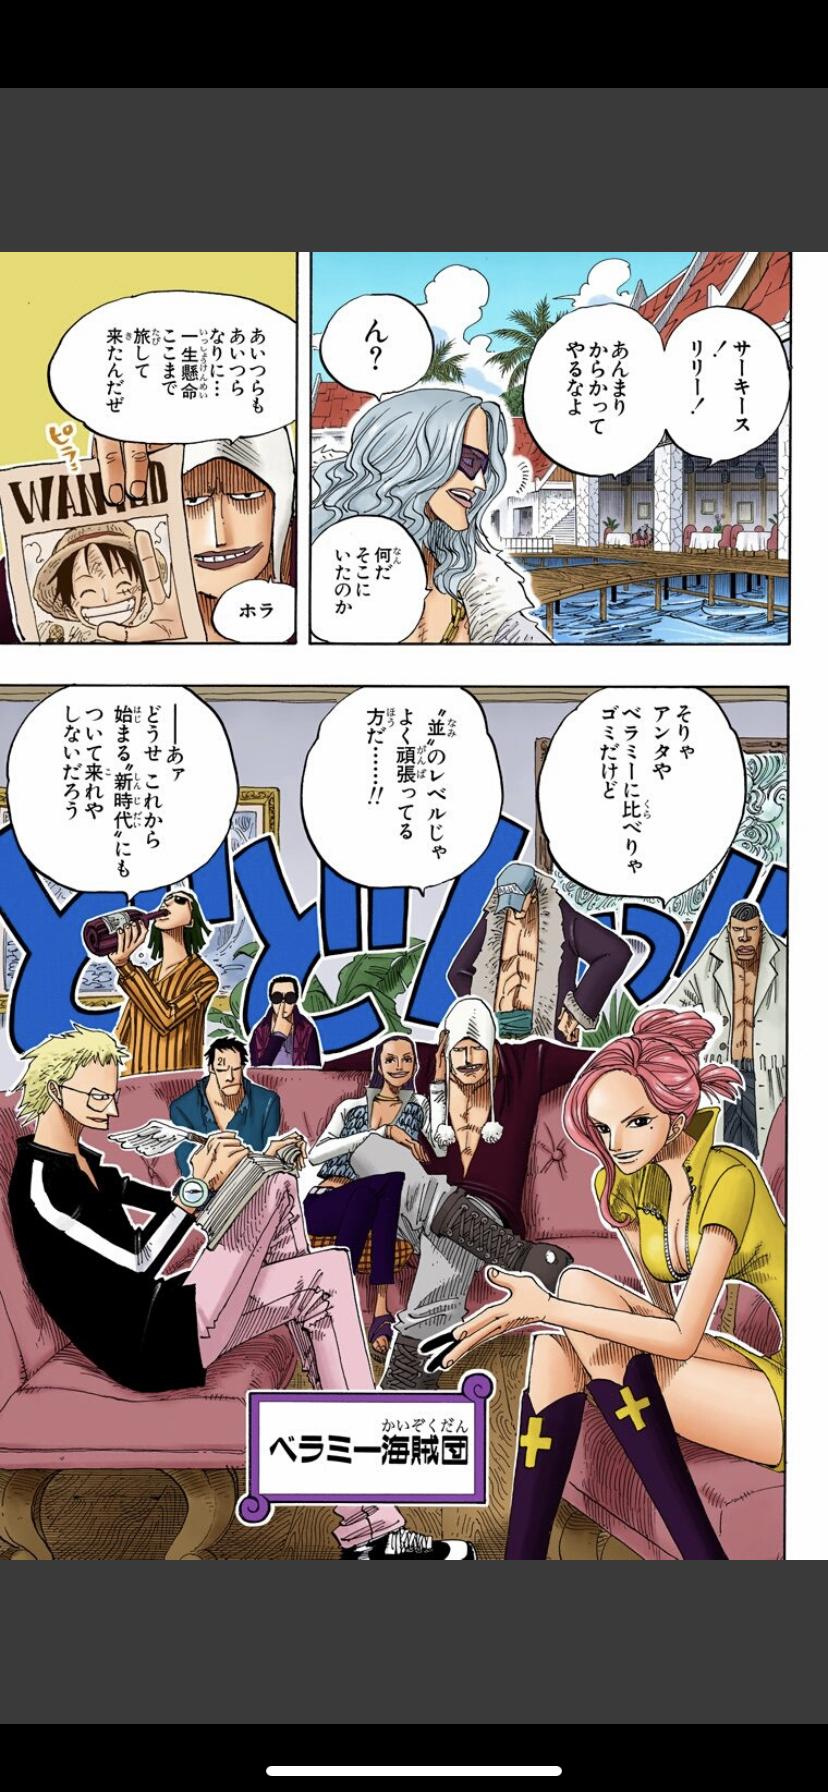 [Image] The wwwww is too scared of real pirates that appeared in one piece